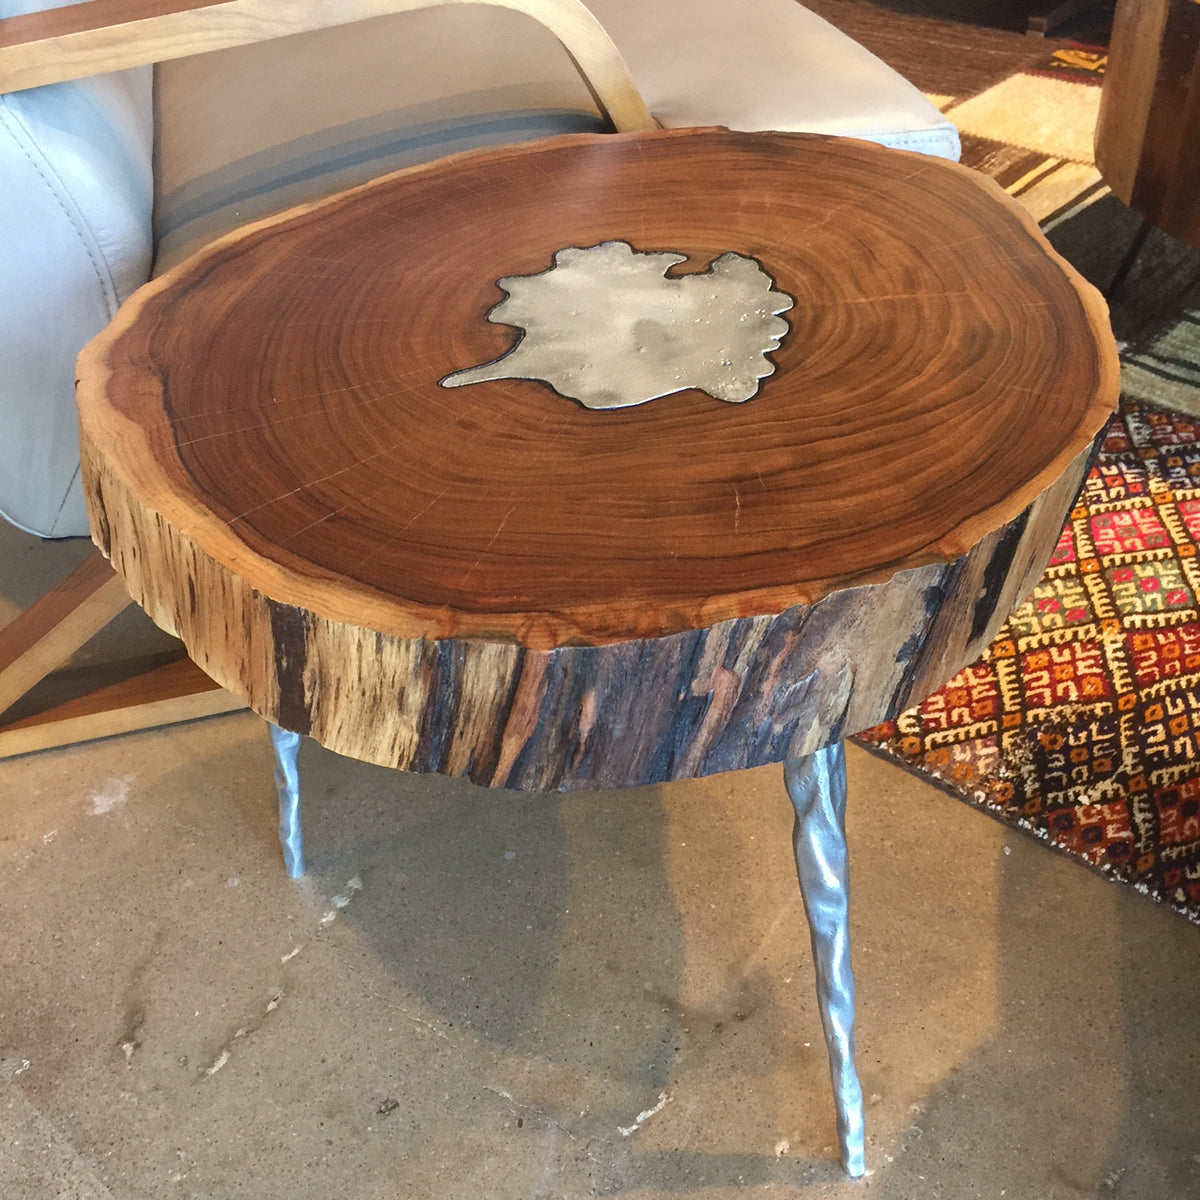 Molten Side Table